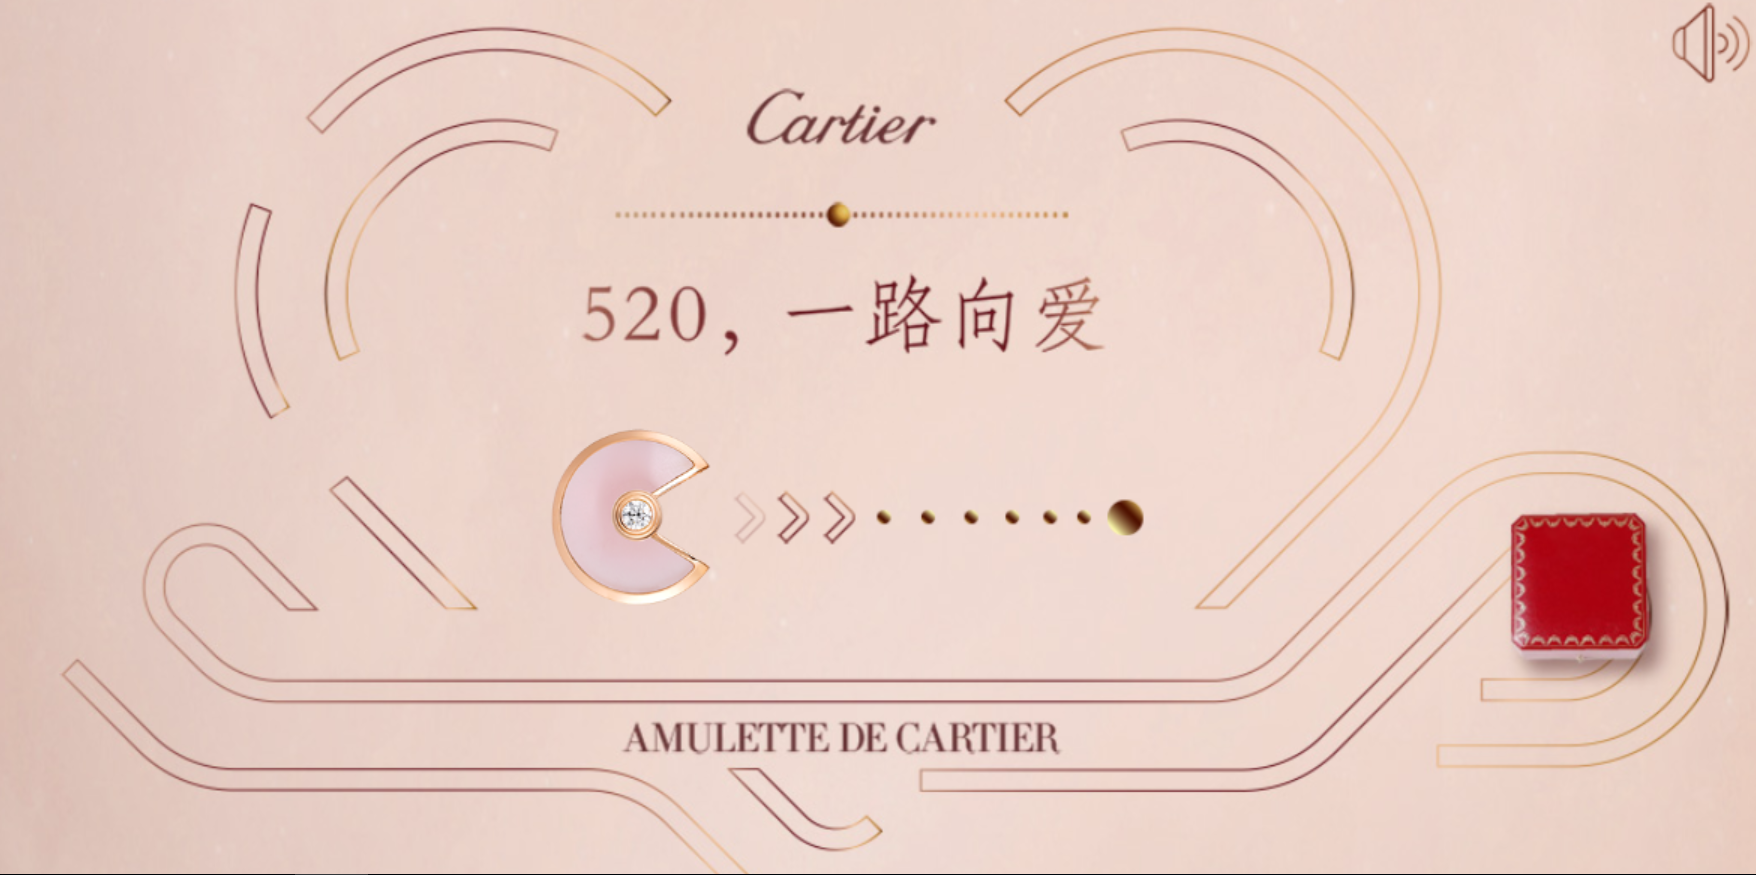 Cartier's "520" WeChat campaign plays off the classic "Pac-Man" to promote its "Amulette" collection.